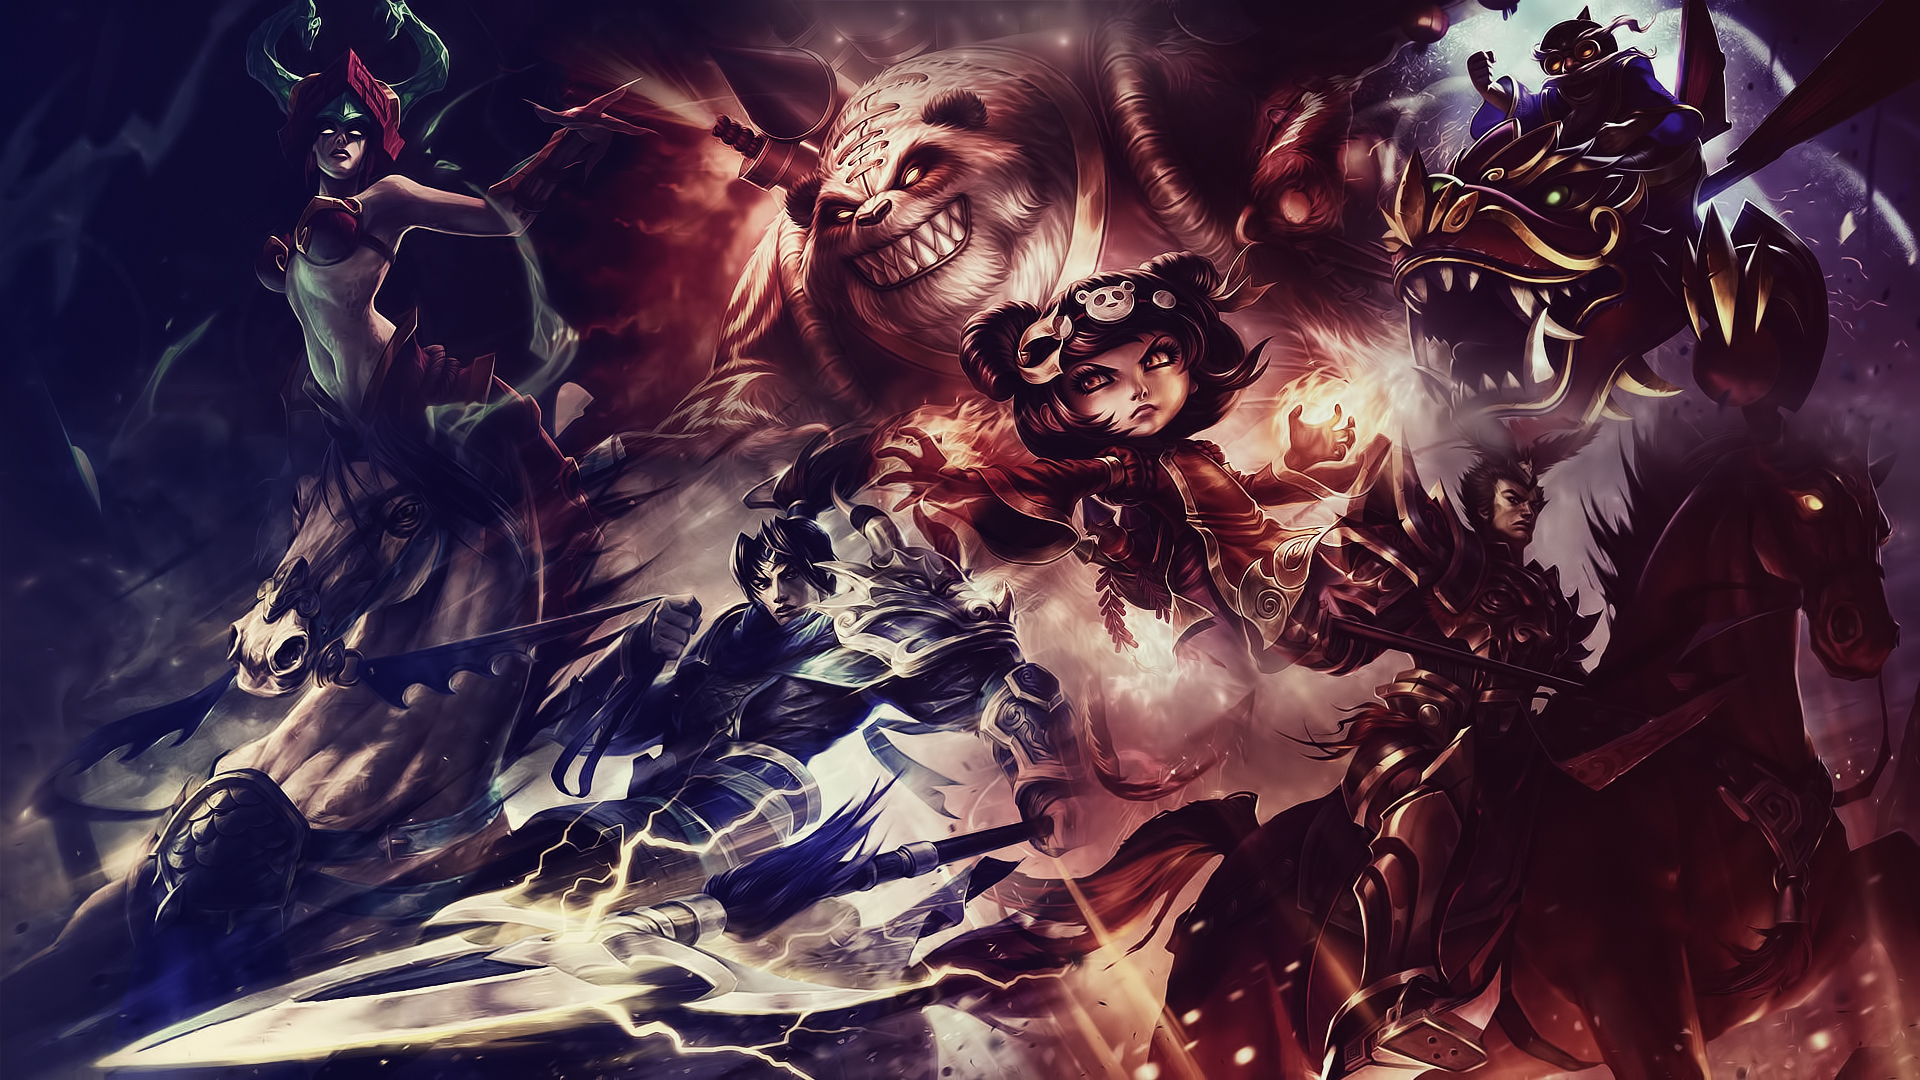 Video Game League Of Legends HD Wallpaper by iamsointense